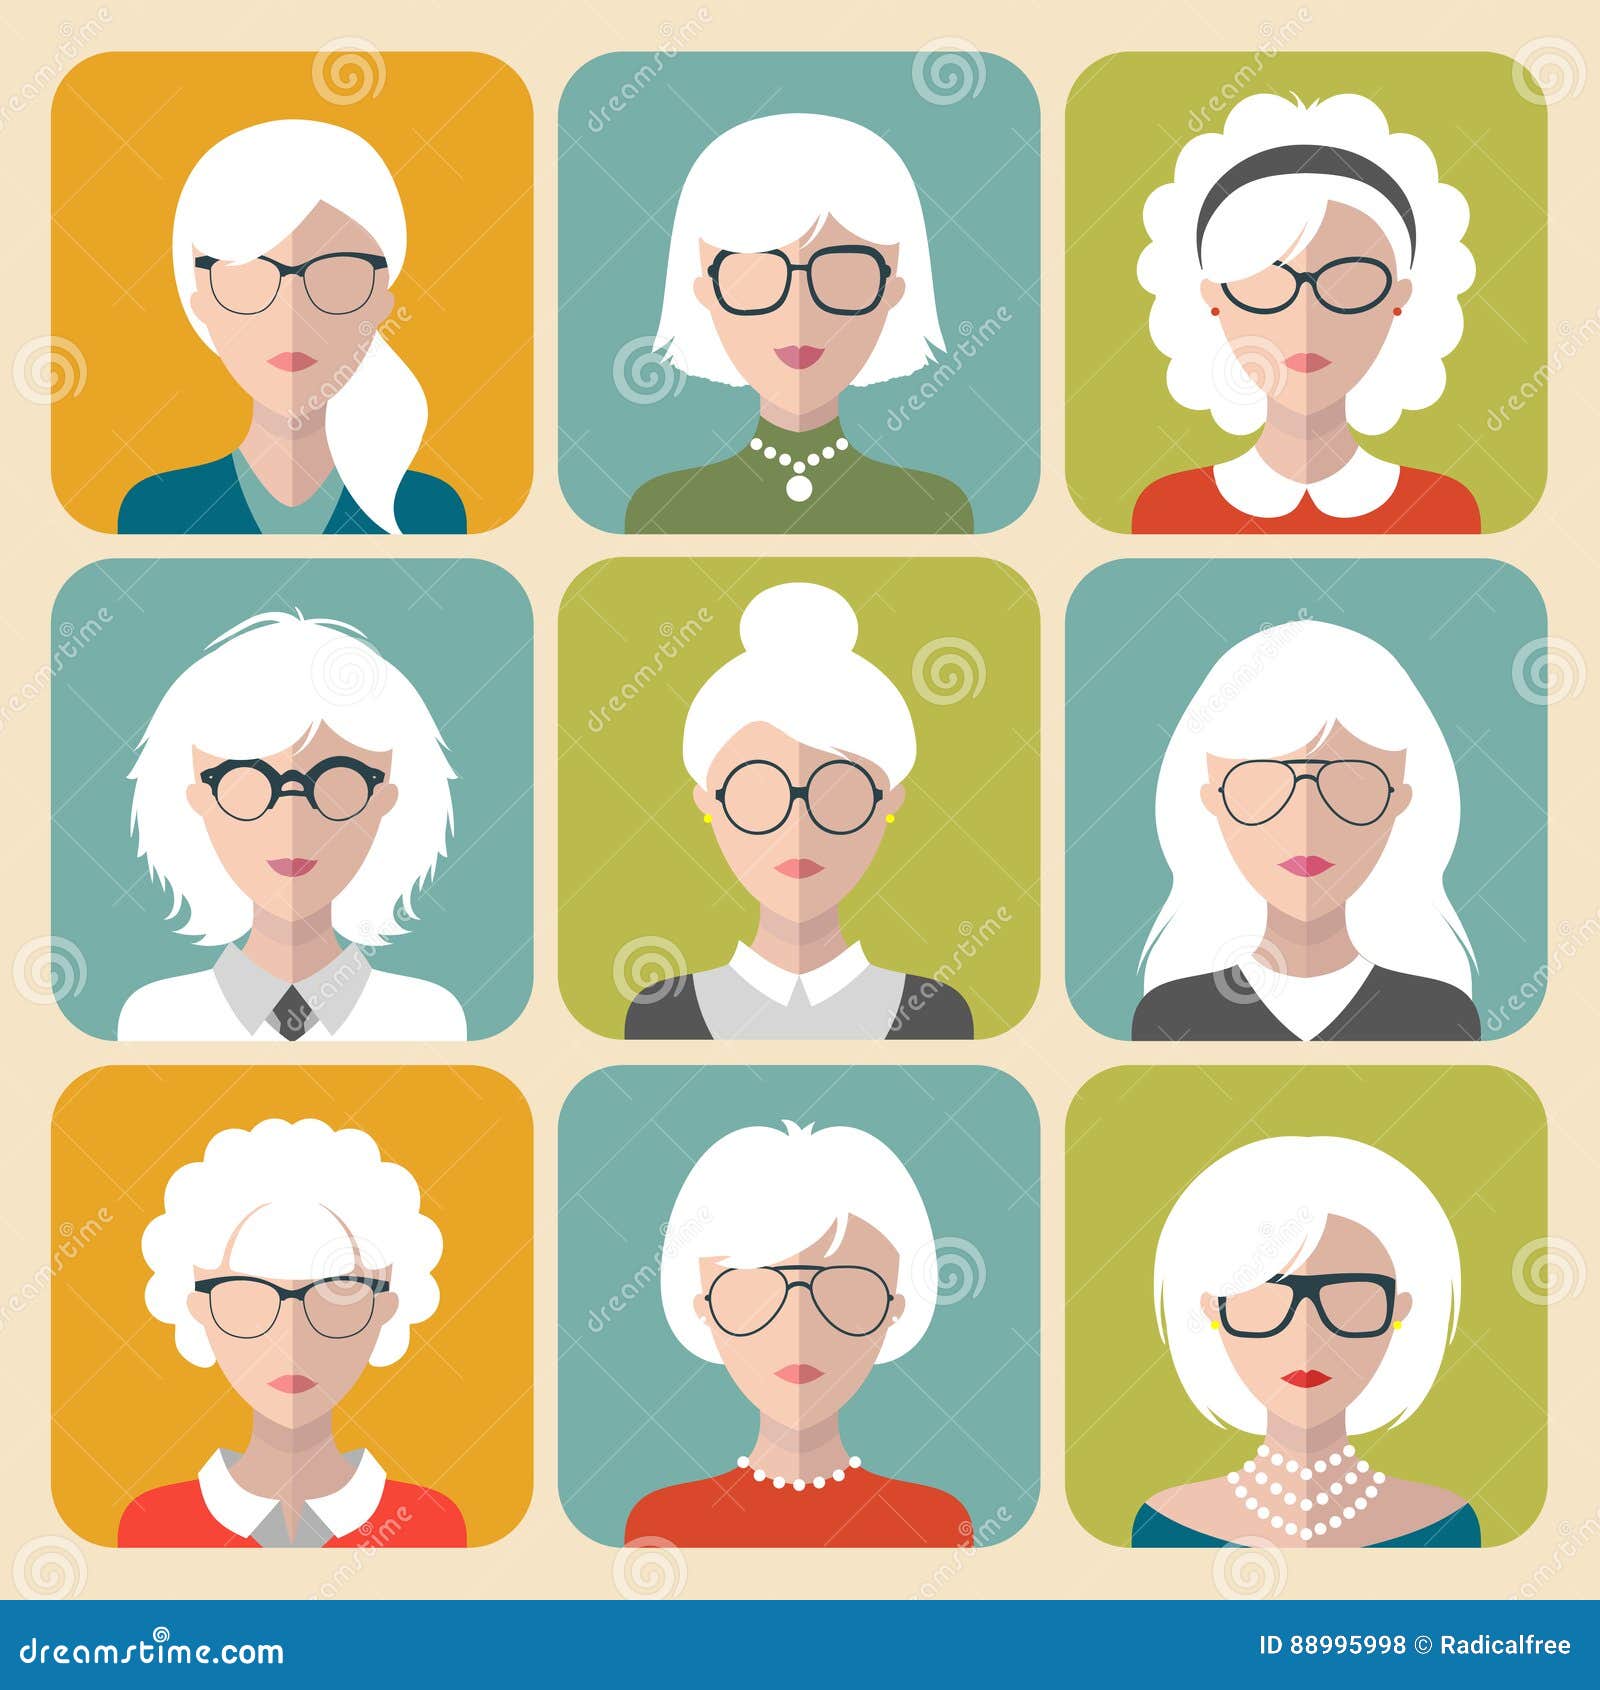 Vector Set of Different Old Woman with Gray Hair App Icons in Flat Style.  Heads and Faces Images Collection. Stock Vector - Illustration of grandma,  icon: 88995998